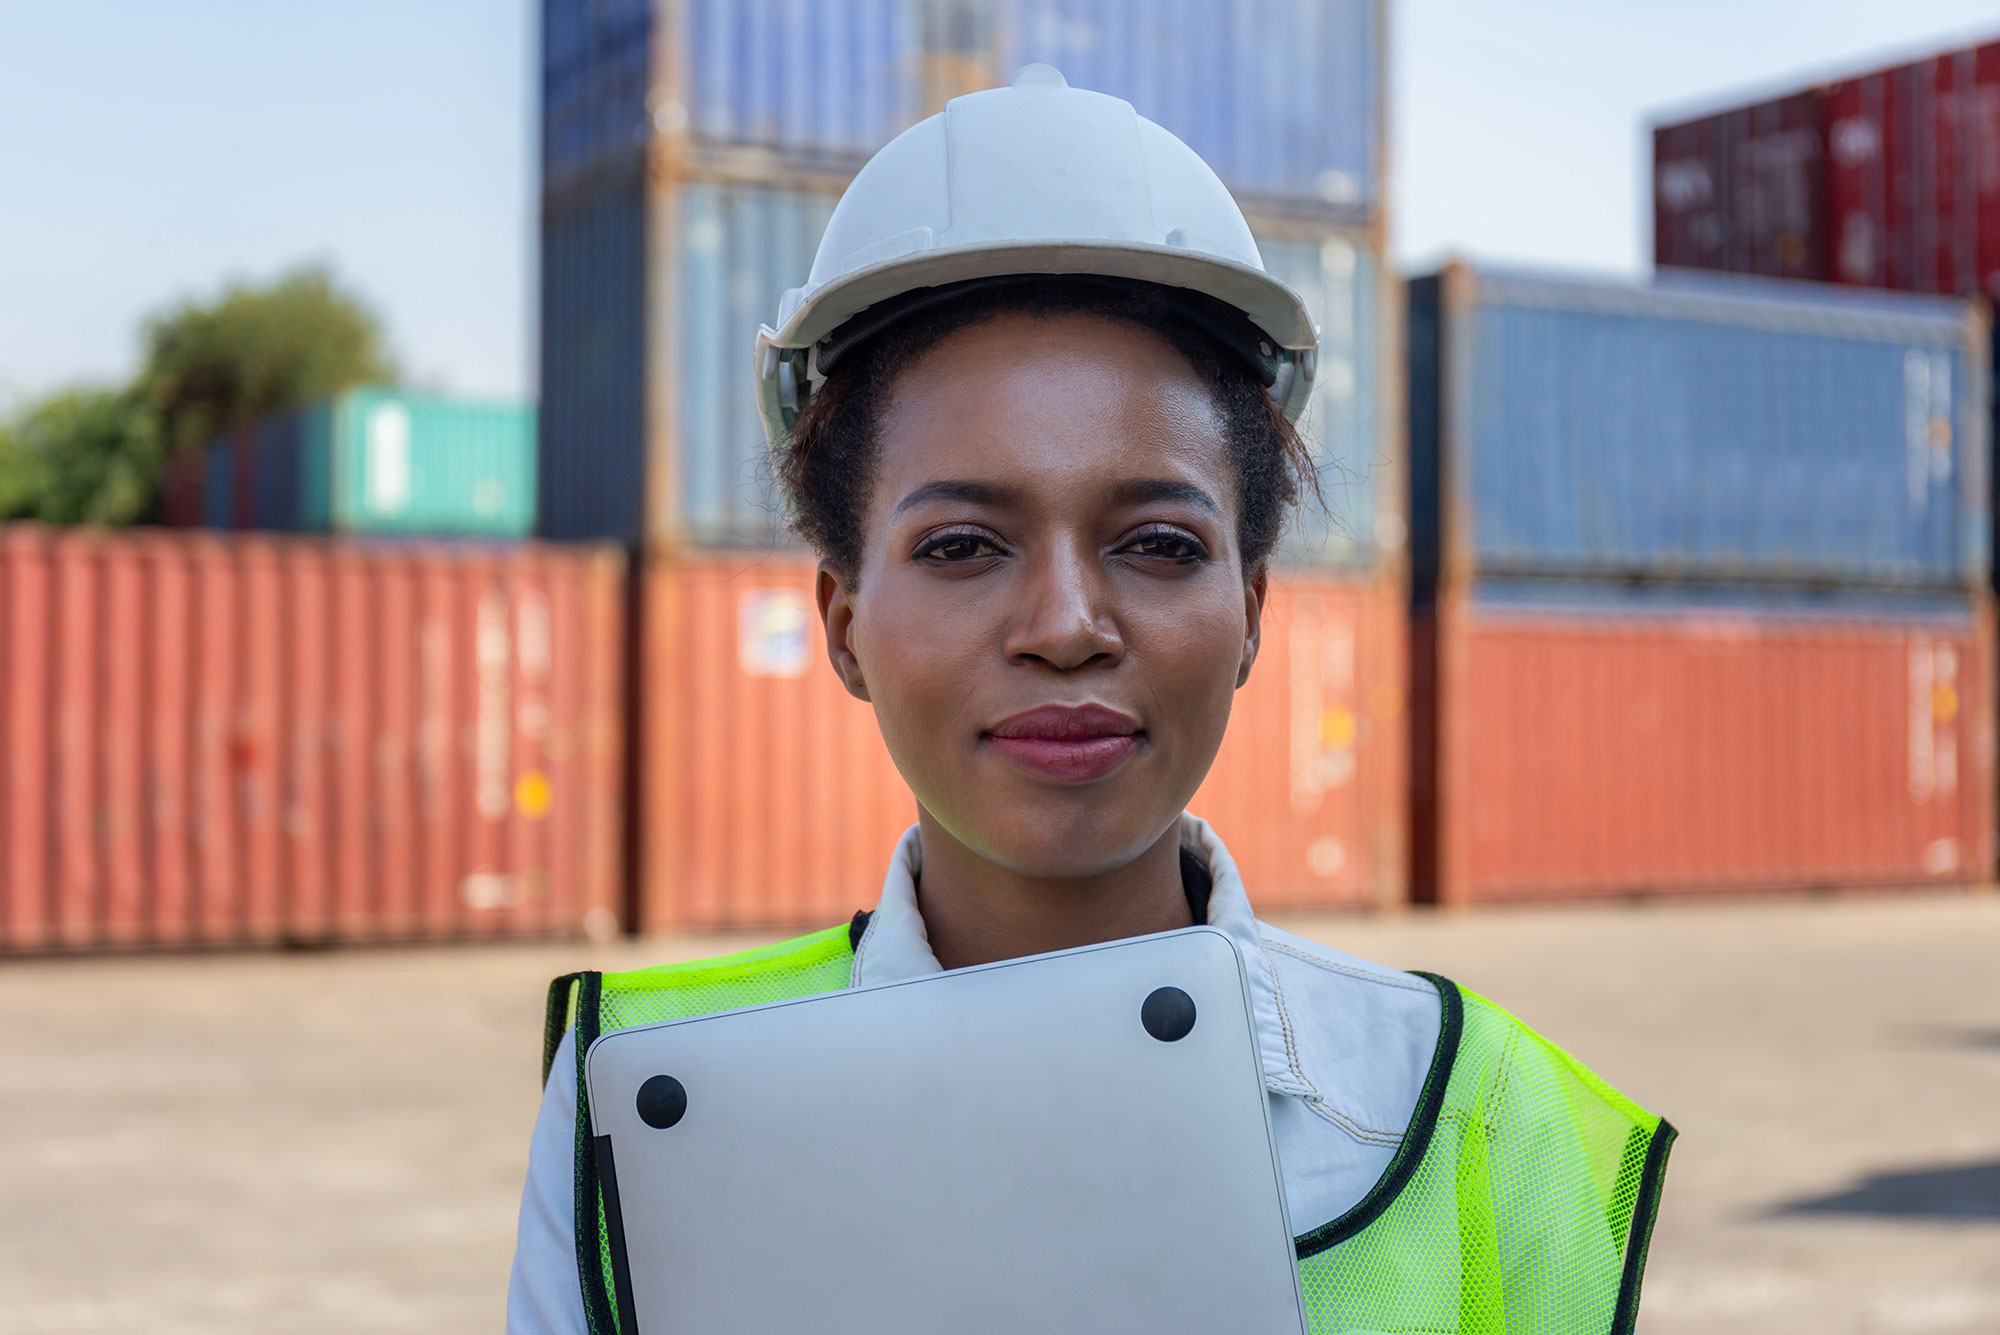 Young lady with hard hat and clip board with containers behind her